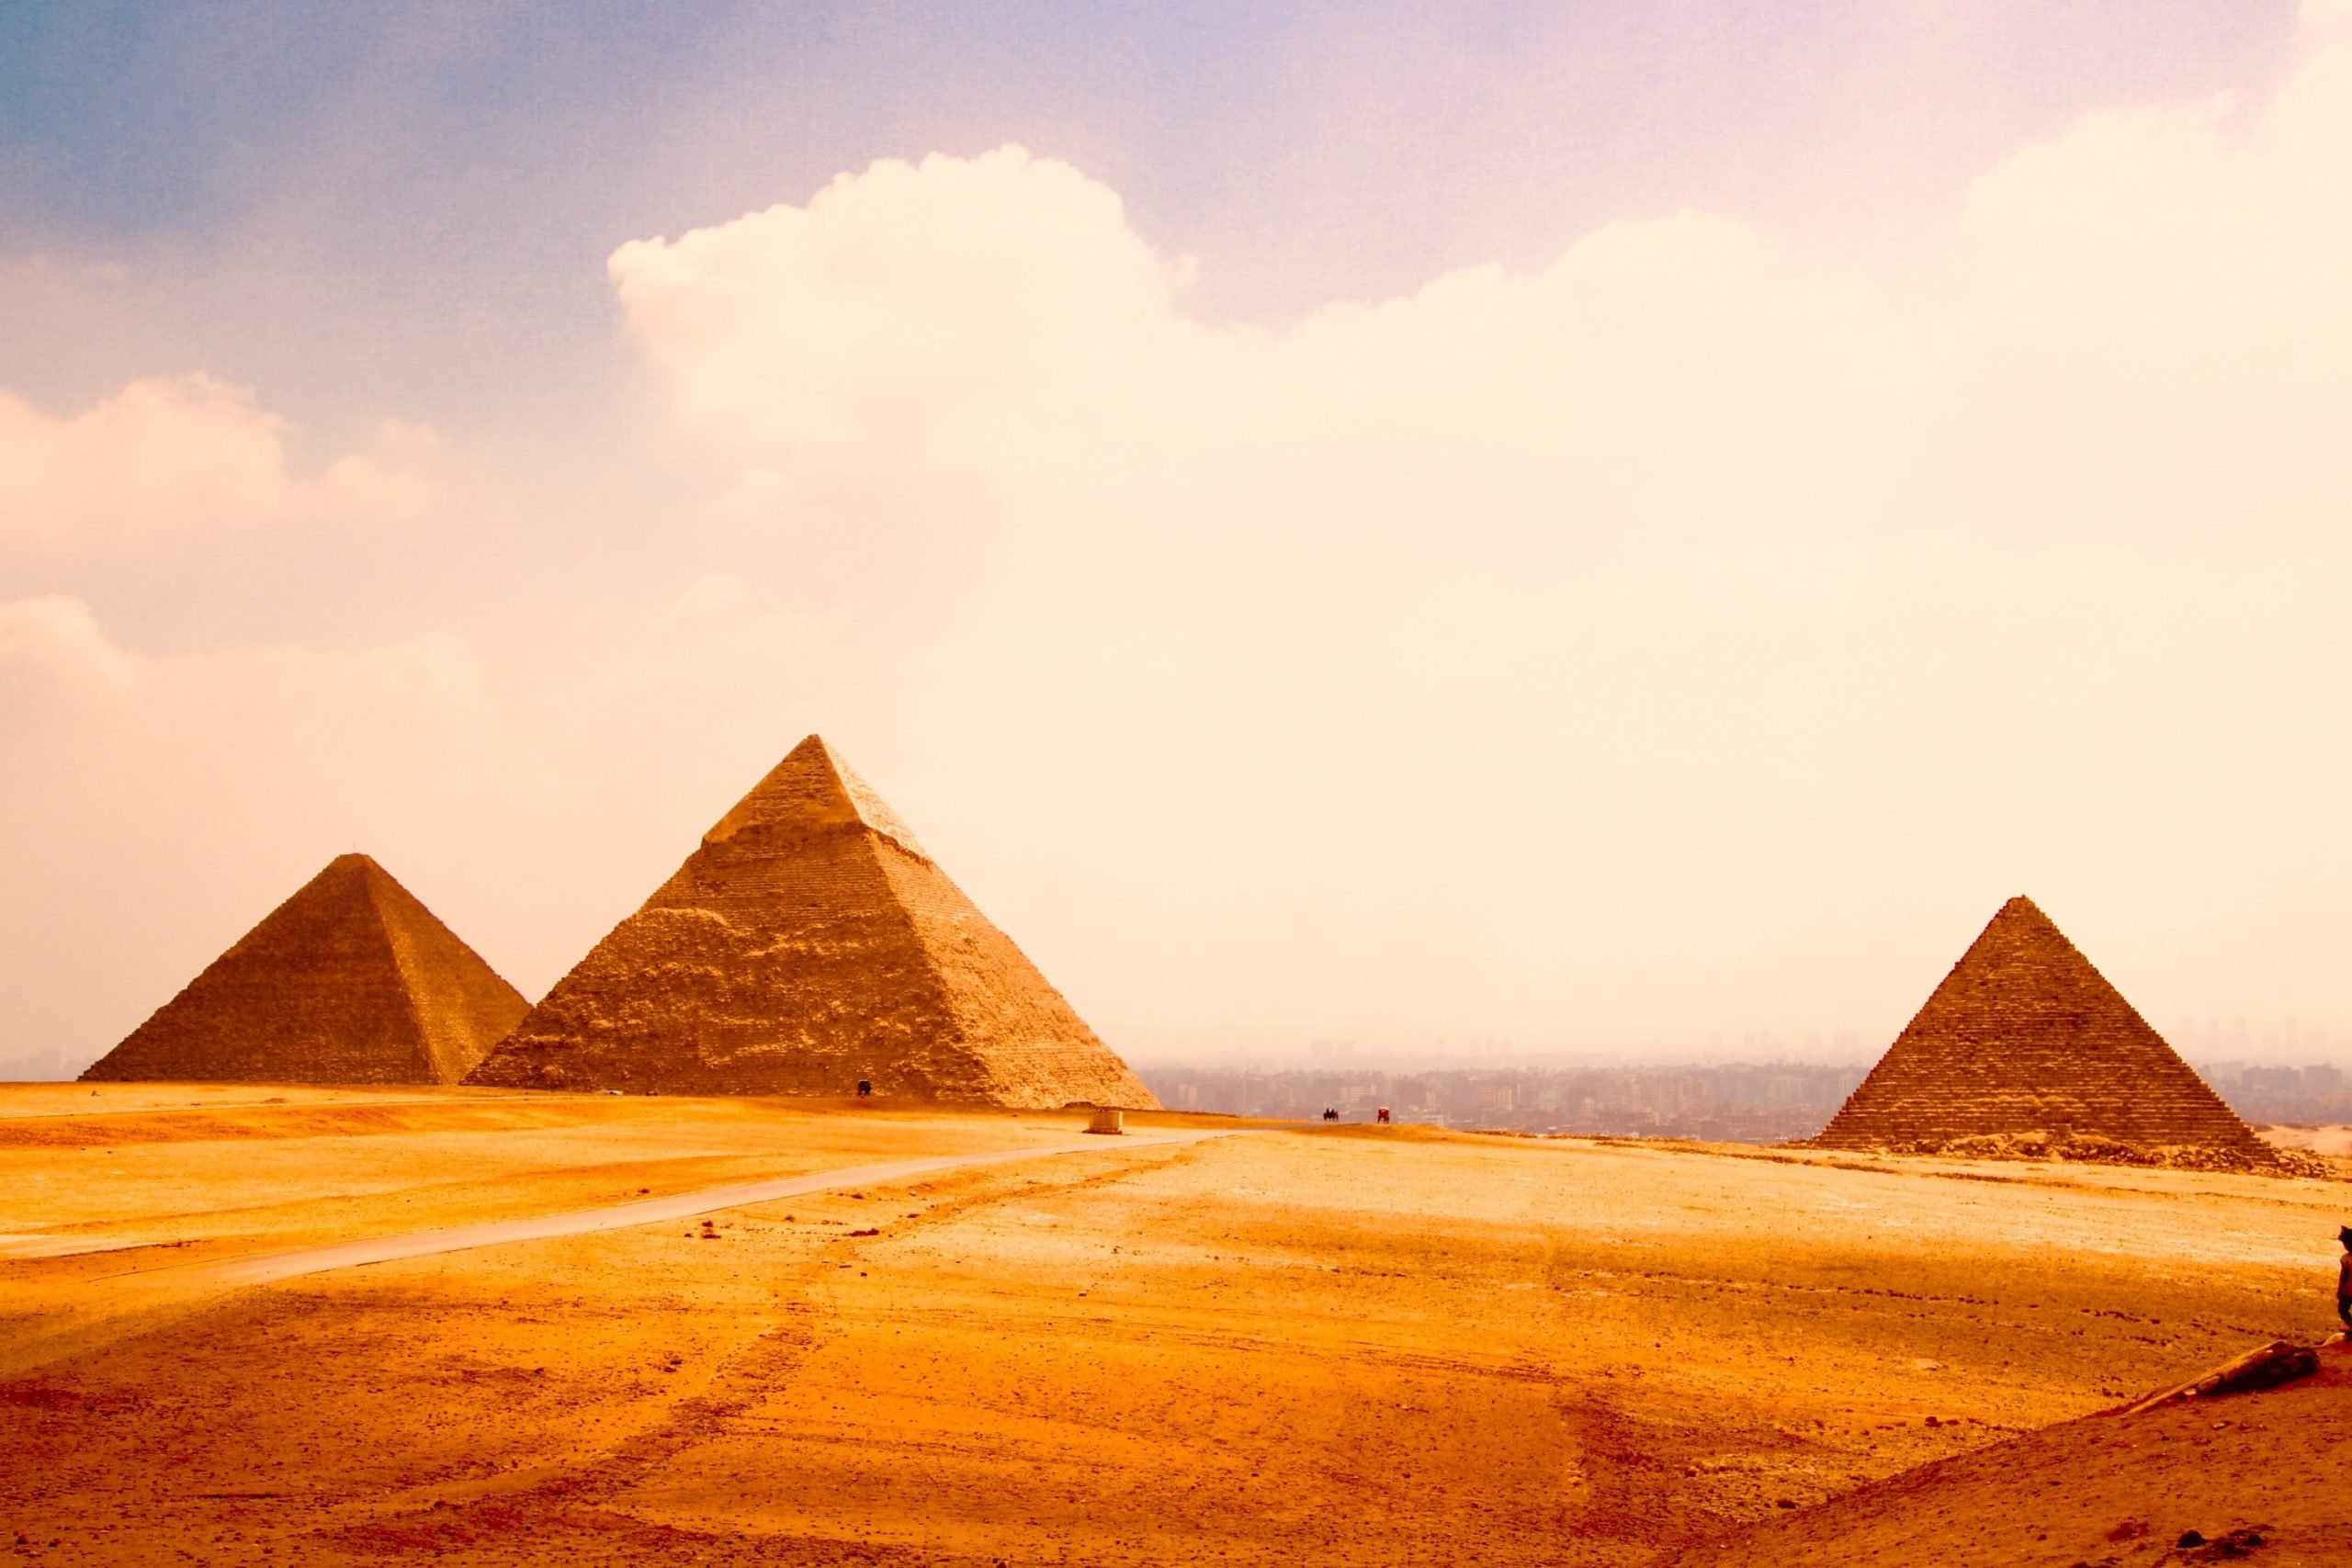 How To Get From Cairo Airport To Pyramids - All Possible Ways